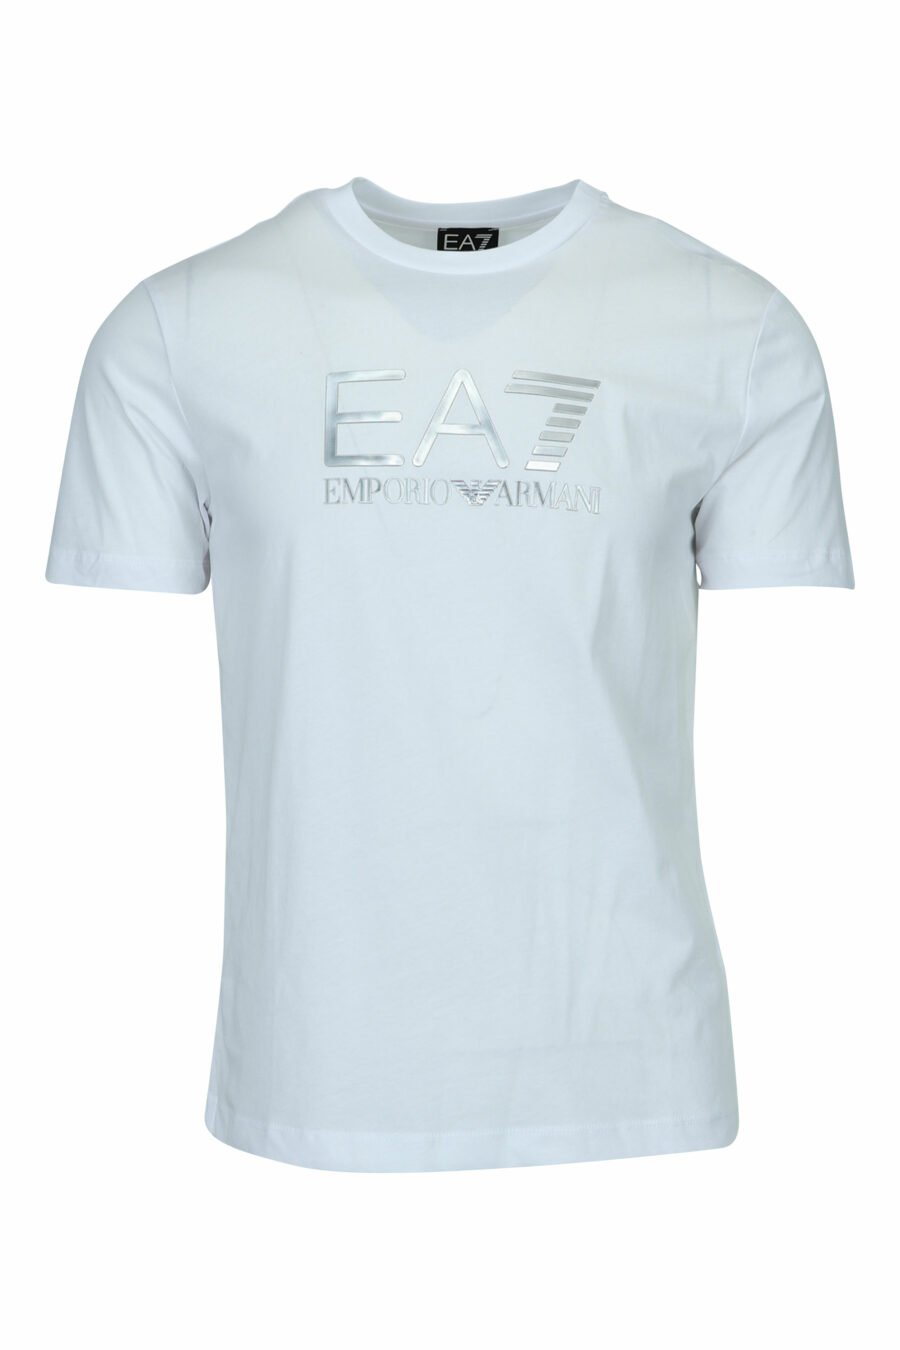 White T-shirt with "lux identity" maxilogo in gradient - 8057970673118